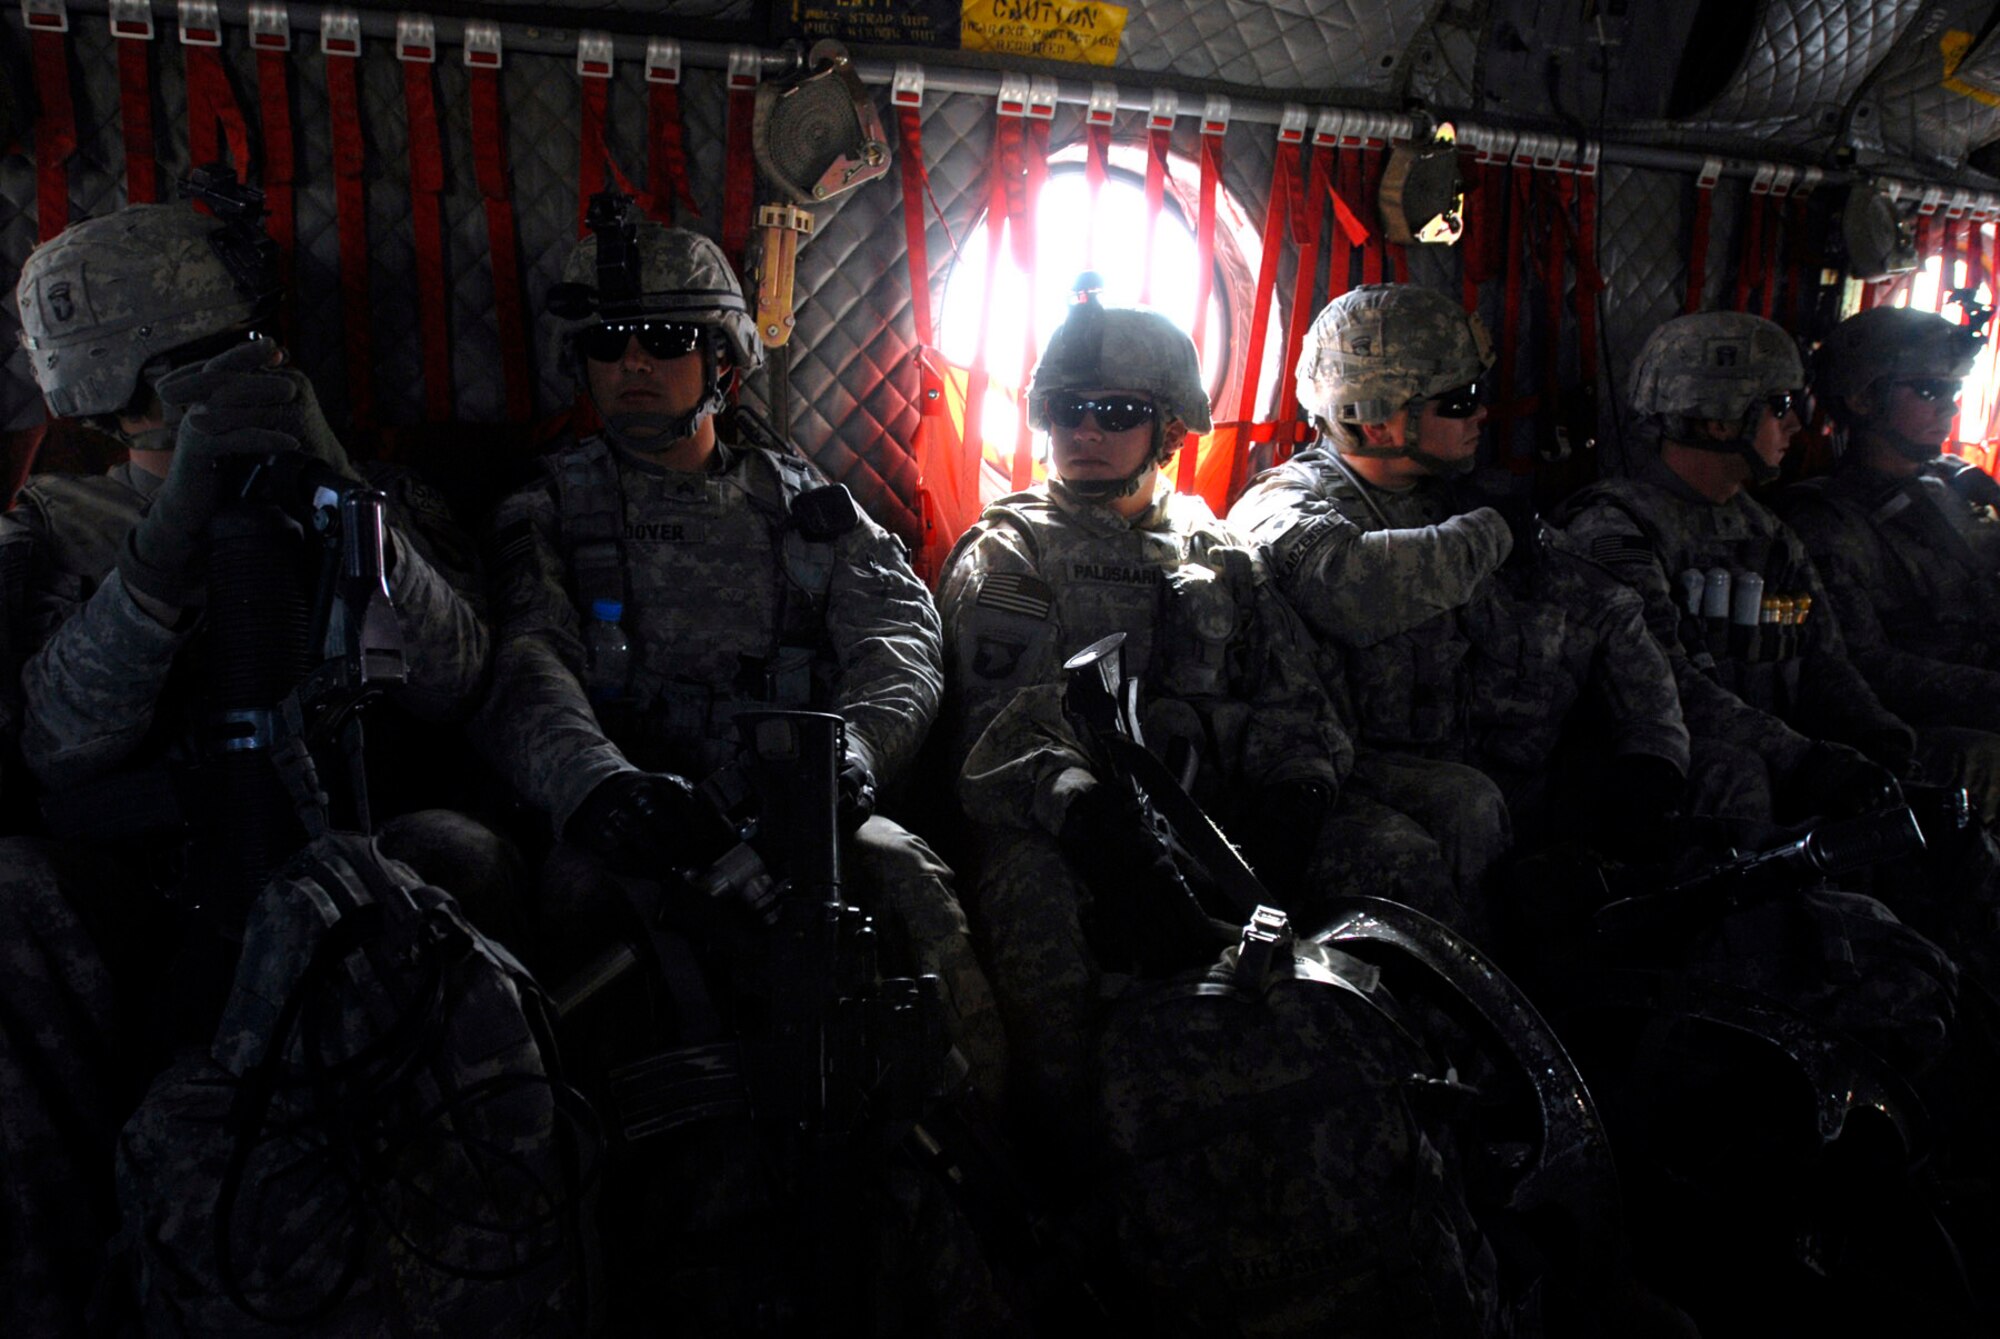 A Soldier with Alpha Company, 101st Division Special Troops Battalion, 101st Airborne Division, is haloed by light shining through a Chinook helicopter's window as he flie out from Bagram Air Field, Afghanistan to air assault into a narrow valley to search for IED making materials Nov. 4.  (Photo by Spc. Mary L. Gonzalez, CJTF-101 Public Affairs)